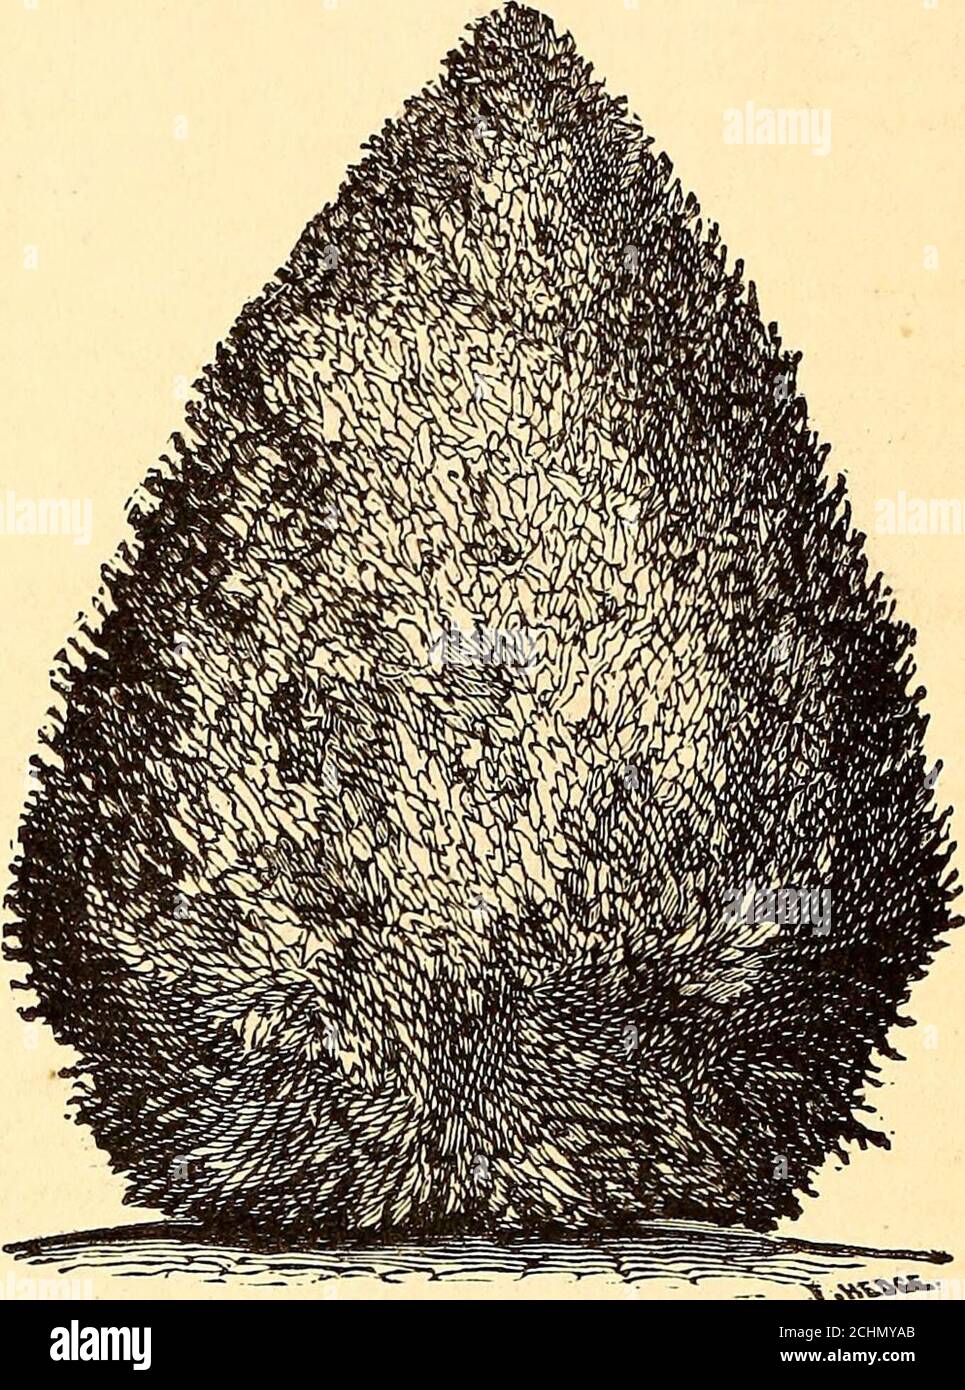 . Reading Nursery : [catalog] 1875. . Xatural-formed Hemlock. Hemlock or Weeping Spruce {Canadensis). An elegantpyramidal tree, with drooping branches, and delicatedark foliage, like that of the Yew. Distinct from allother trees. It is a beautiful lawn tree, and makesa highly ornamental hedge. Prunes into any form.A graceful, large tree it left to nature. See cut cfa pruned tree, also a cut of natural tree of loosVhabit. 3 feet, 50c; 4 to 5 feet, $1. 22 CATALOGUE OF READING NURSERY, MASS.—J. W. MANNING, PROPRIETOR.. Pruned Hemlock. Price of pruned trees,  to 3 feet, 75c to $2 each.We have 3 Stock Photo